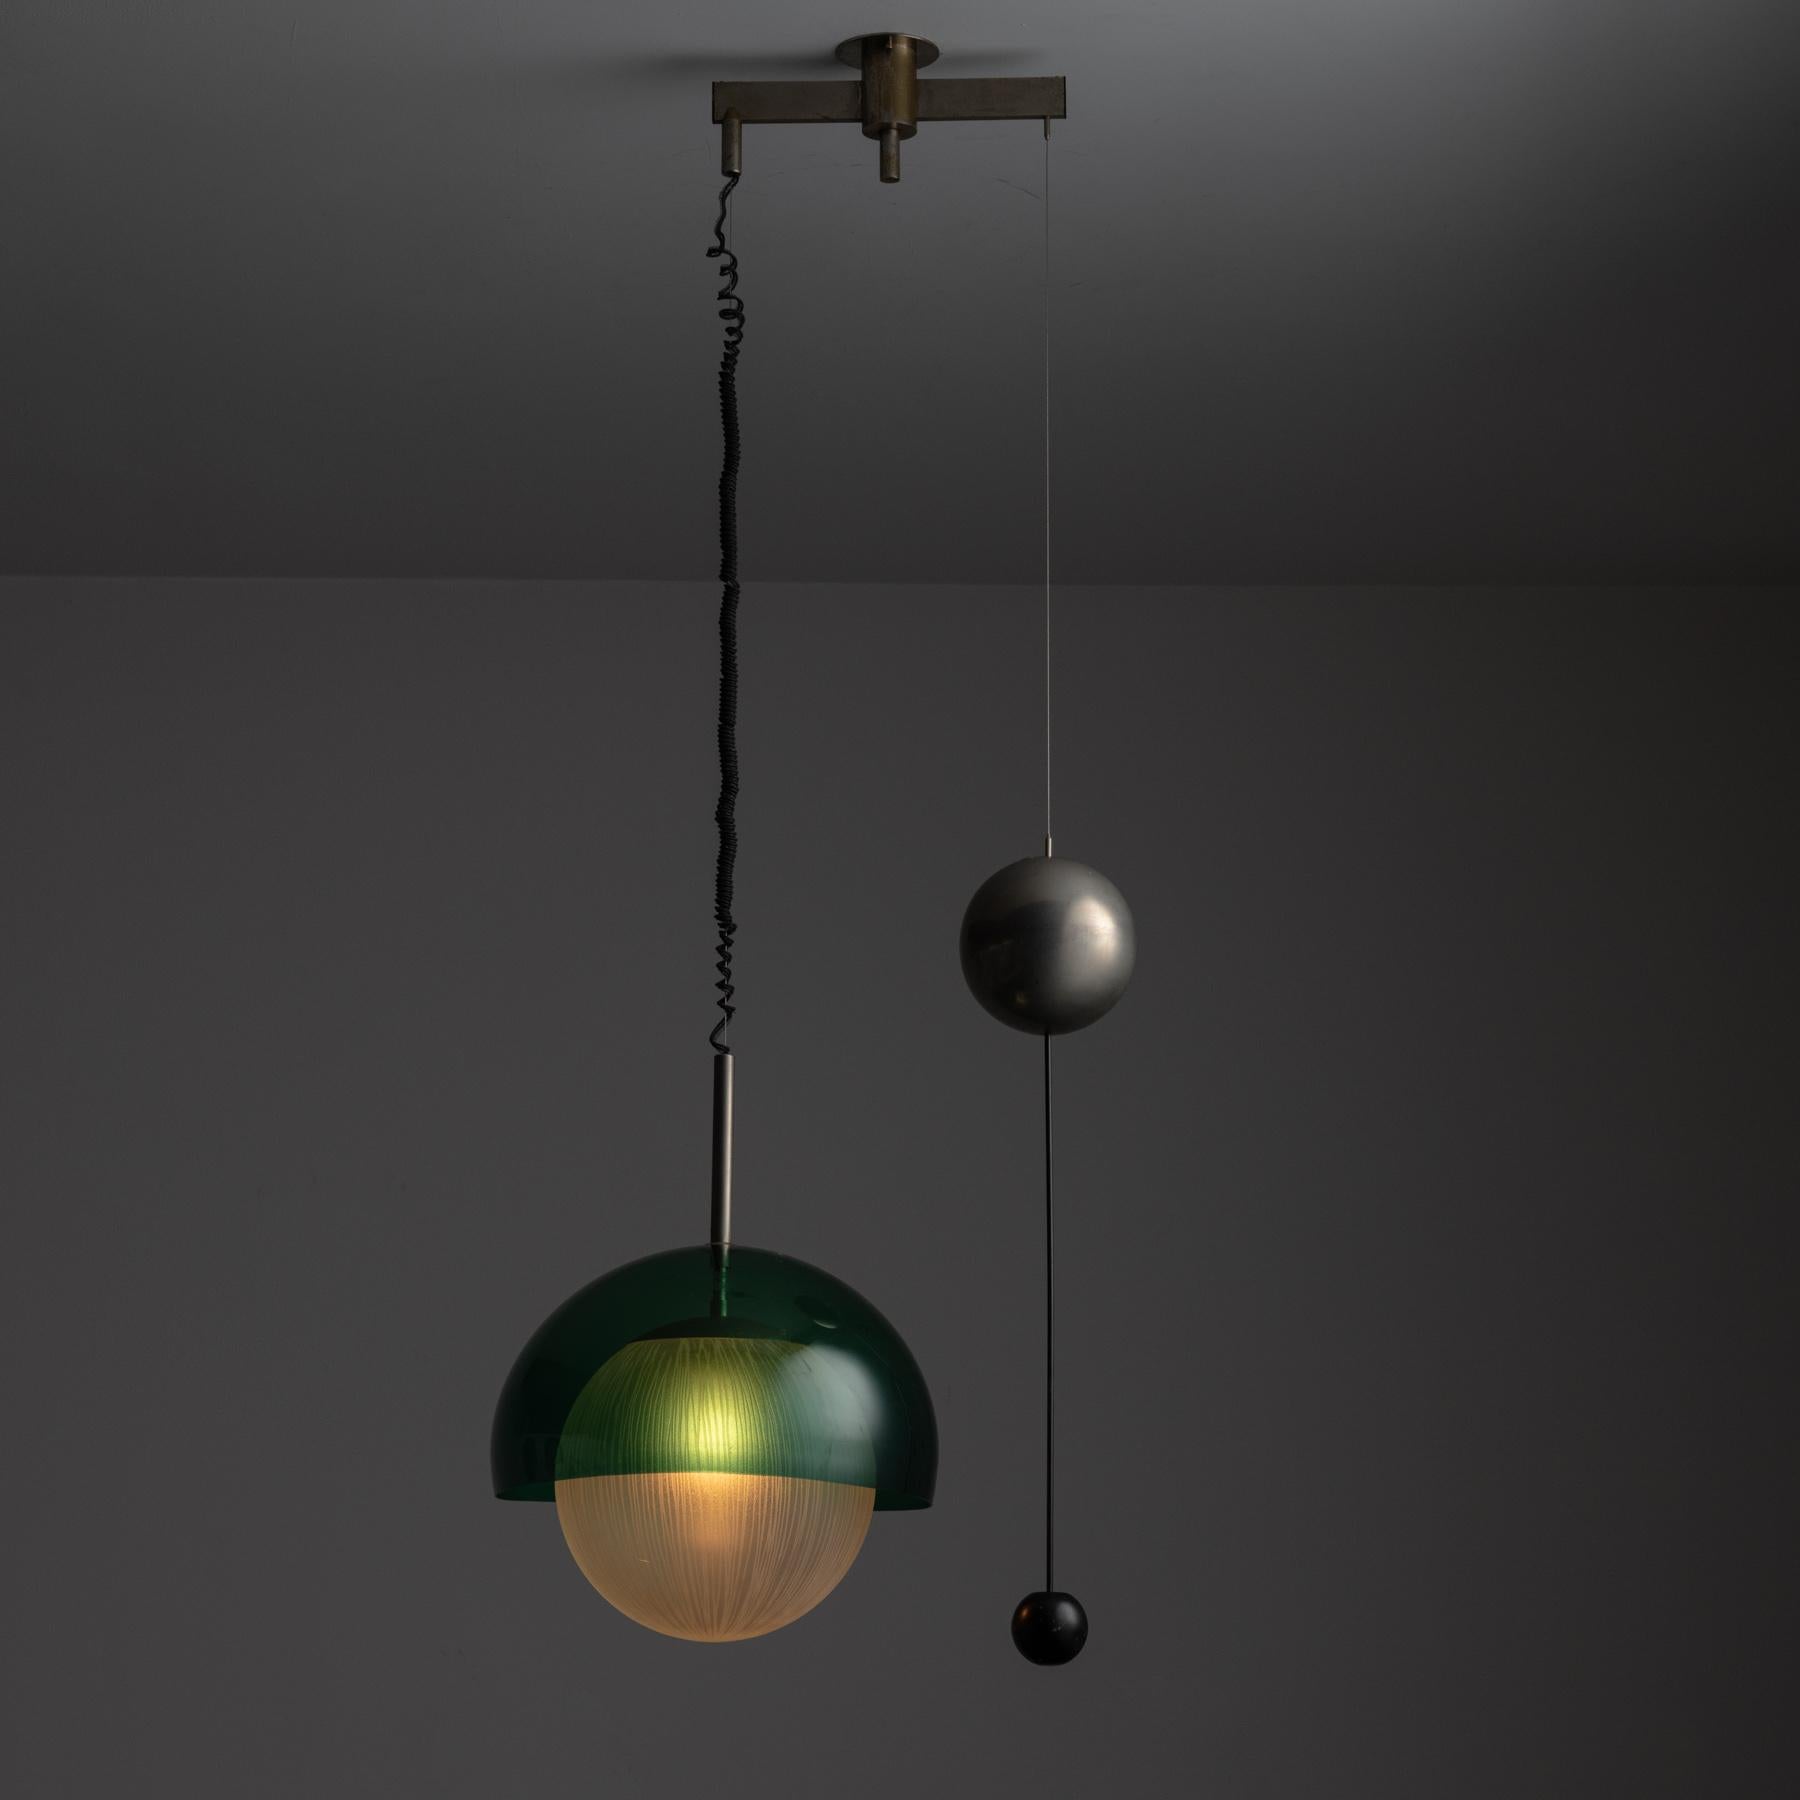 Rare Mod. 12963 Ceiling Light by Angelo Lelii for Arredoluce Monza. Designed and manufactured in Italy, in 1963. A one-of-a-kind suspension light by Lelii. This fixture comprises of a half dome translucent green shade made from formed acrylic.